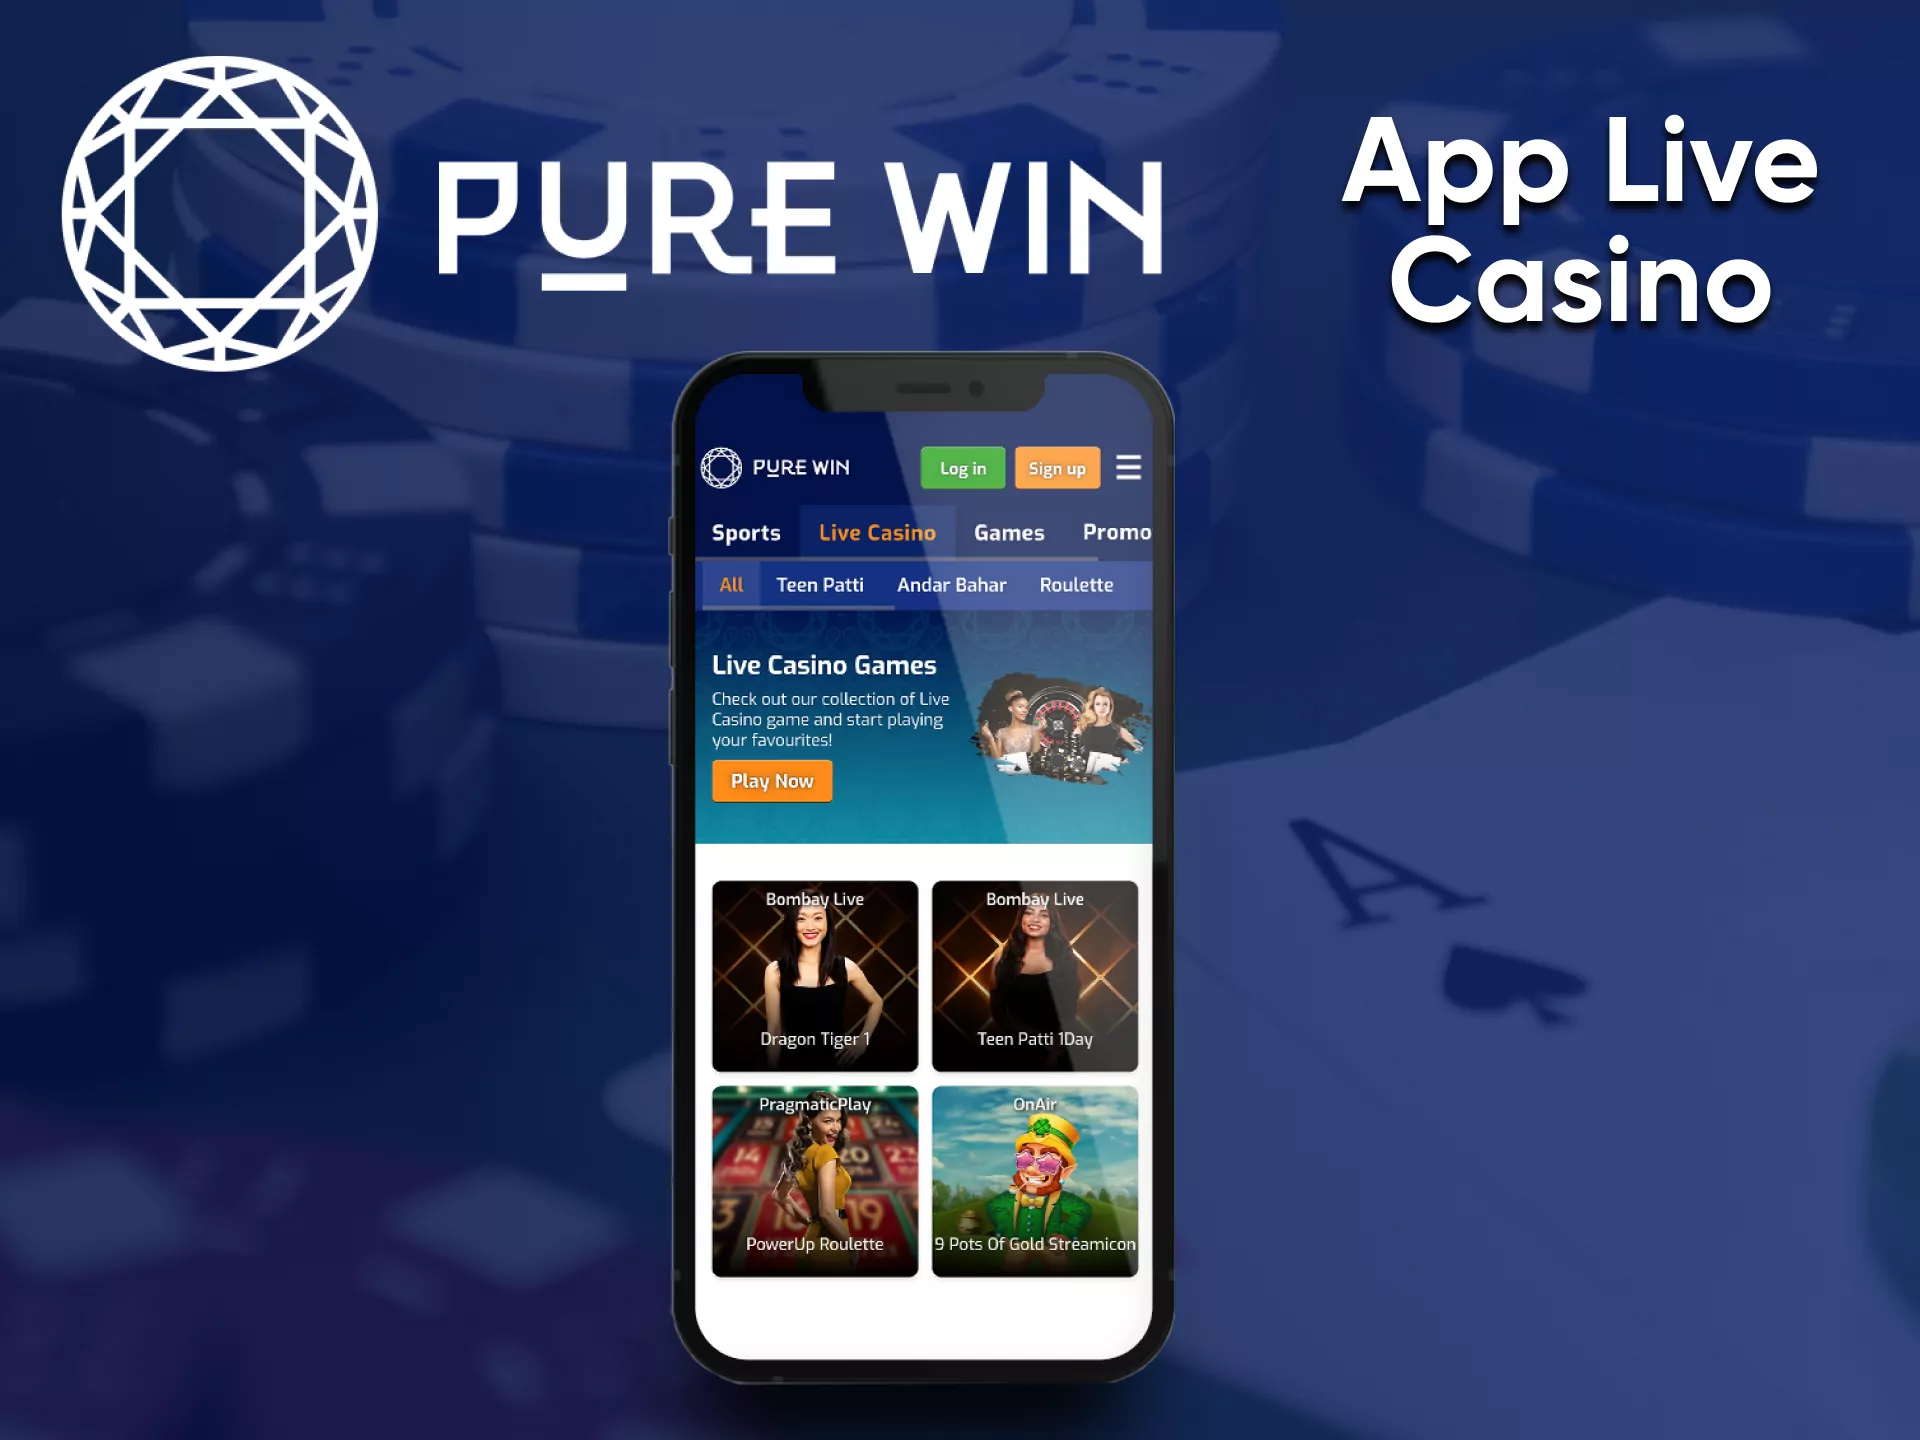 Go to the desired section and play at the live casino from Pure Win.